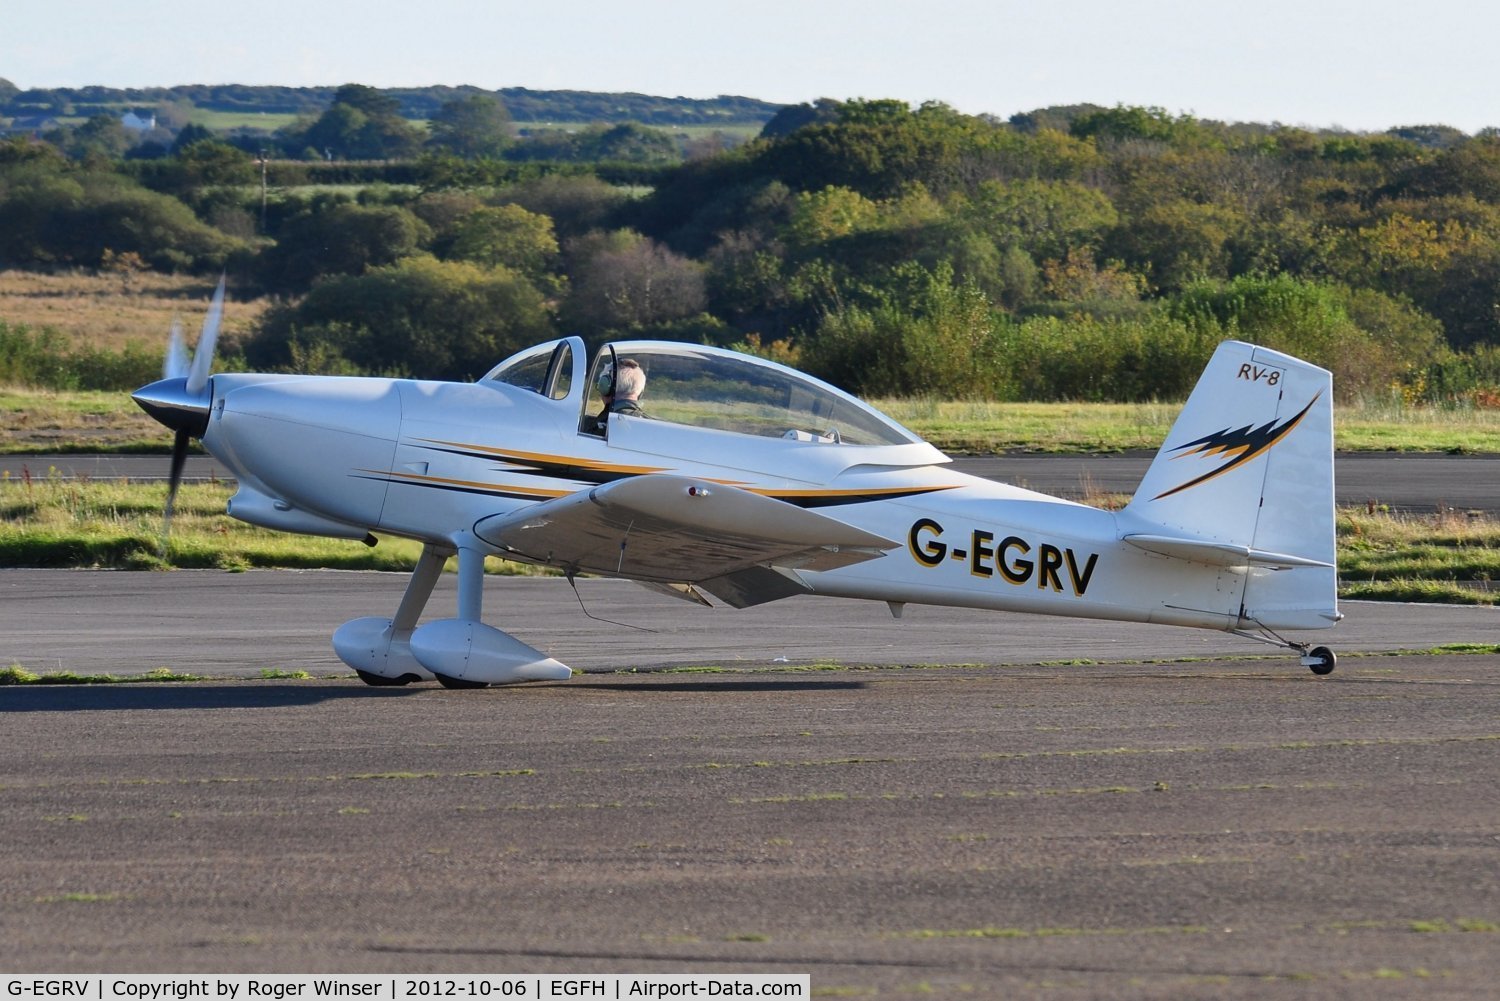 G-EGRV, 2007 Vans RV-8 C/N PFA 303-13639, Resident RV-8 with wheel spats refitted. Previously registered G-PHMG.